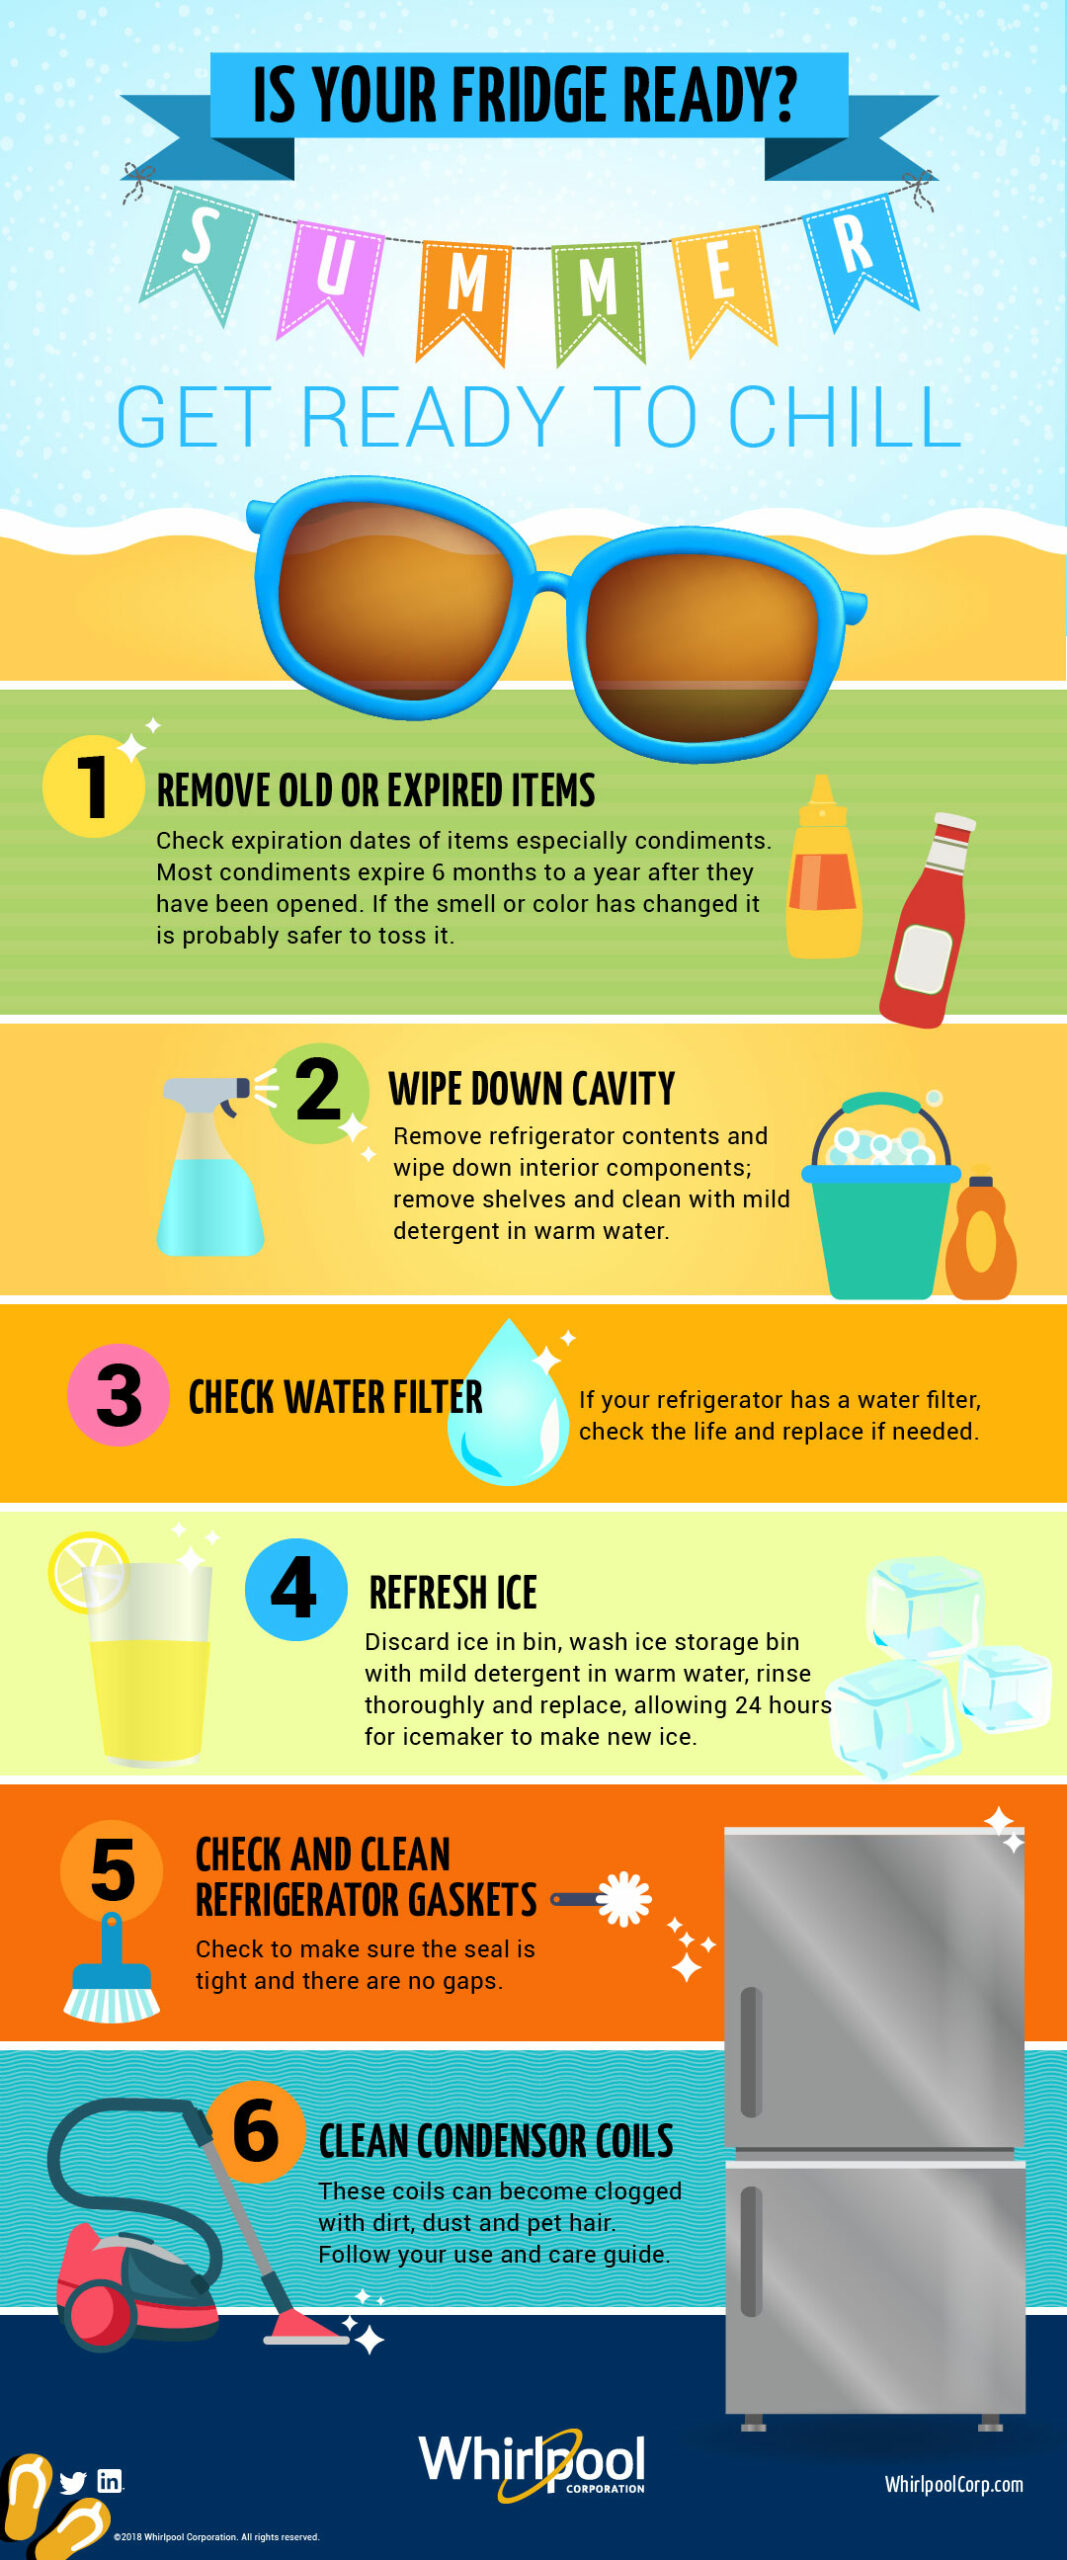 Is your fridge ready for summer? 1) Remove expired items. 2) Wipe down cavity. 3) Check water filter. 4) Refresh Ice. 5) Check and clean gaskets. 6) Clean coils.